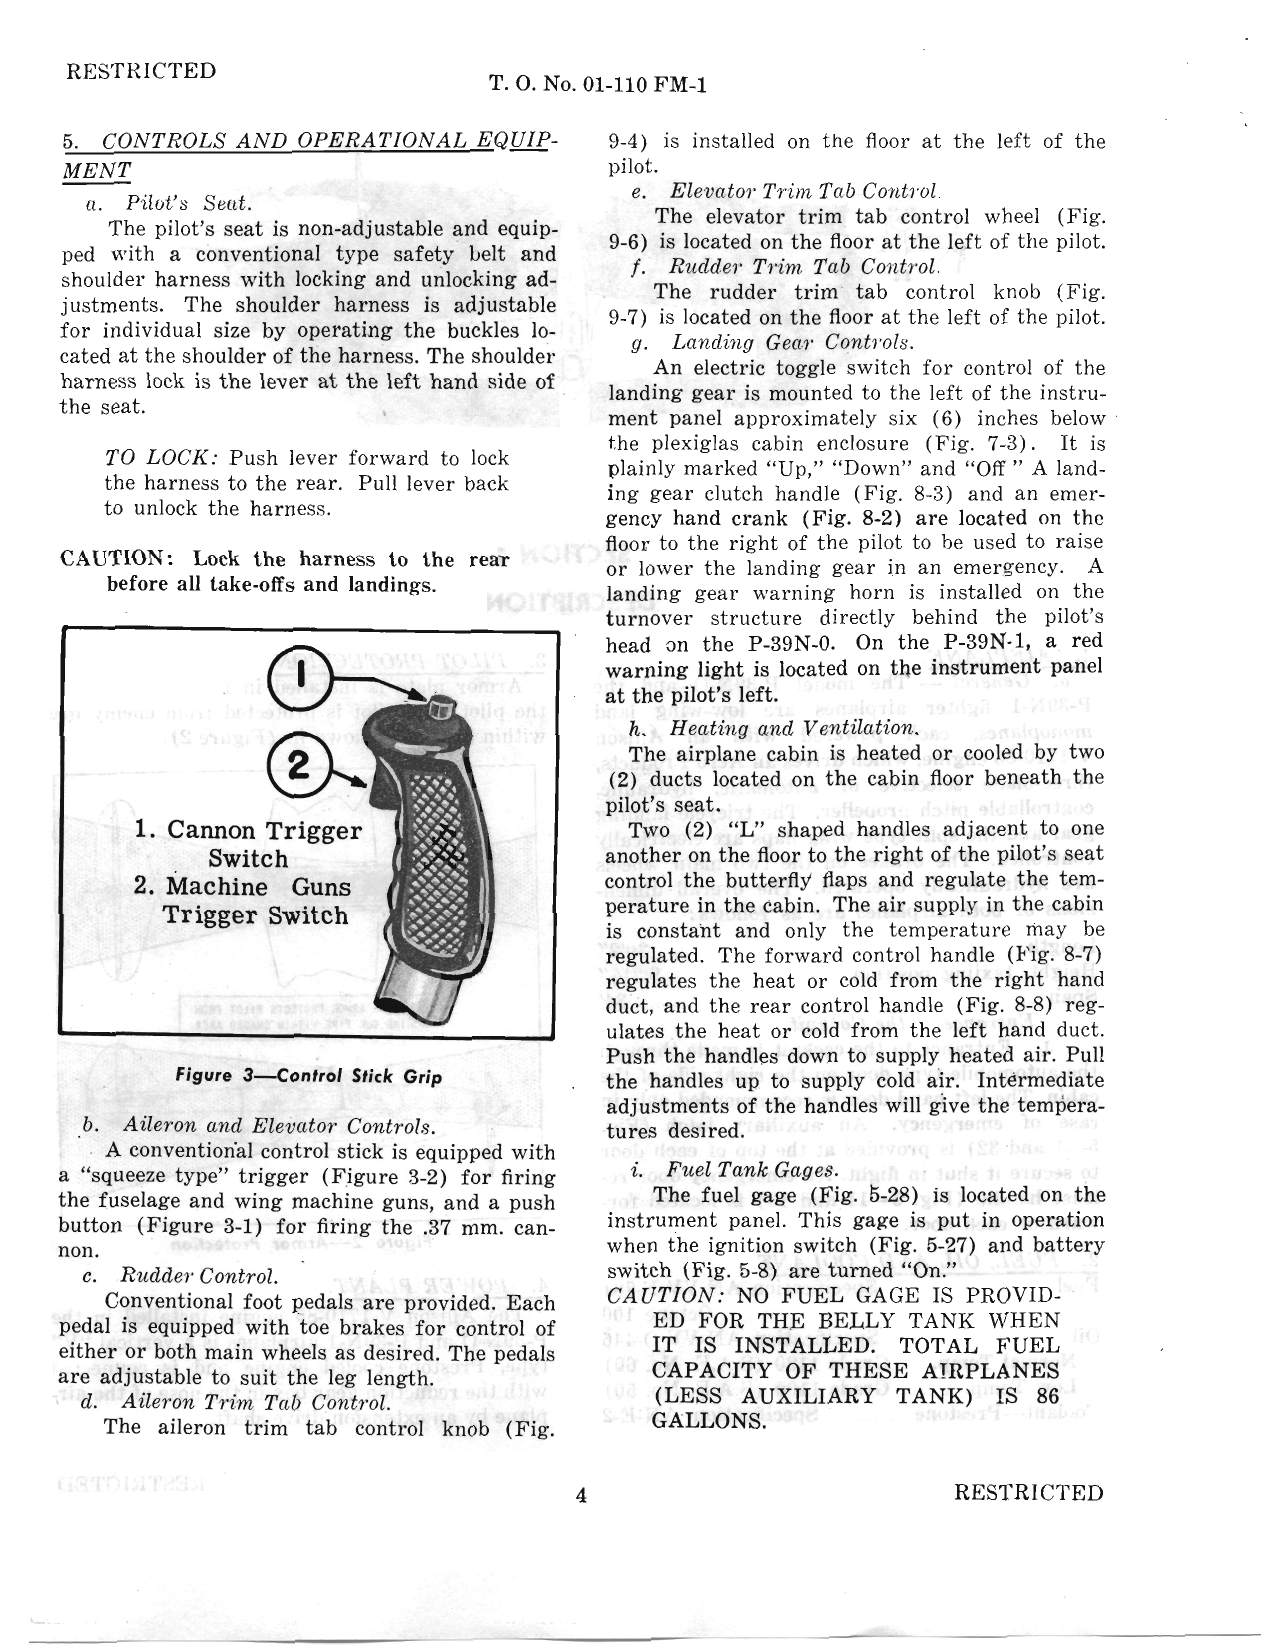 Sample page 6 from AirCorps Library document: Pilot's Flight Operating Instructions for P-39N-O and P-39N-1